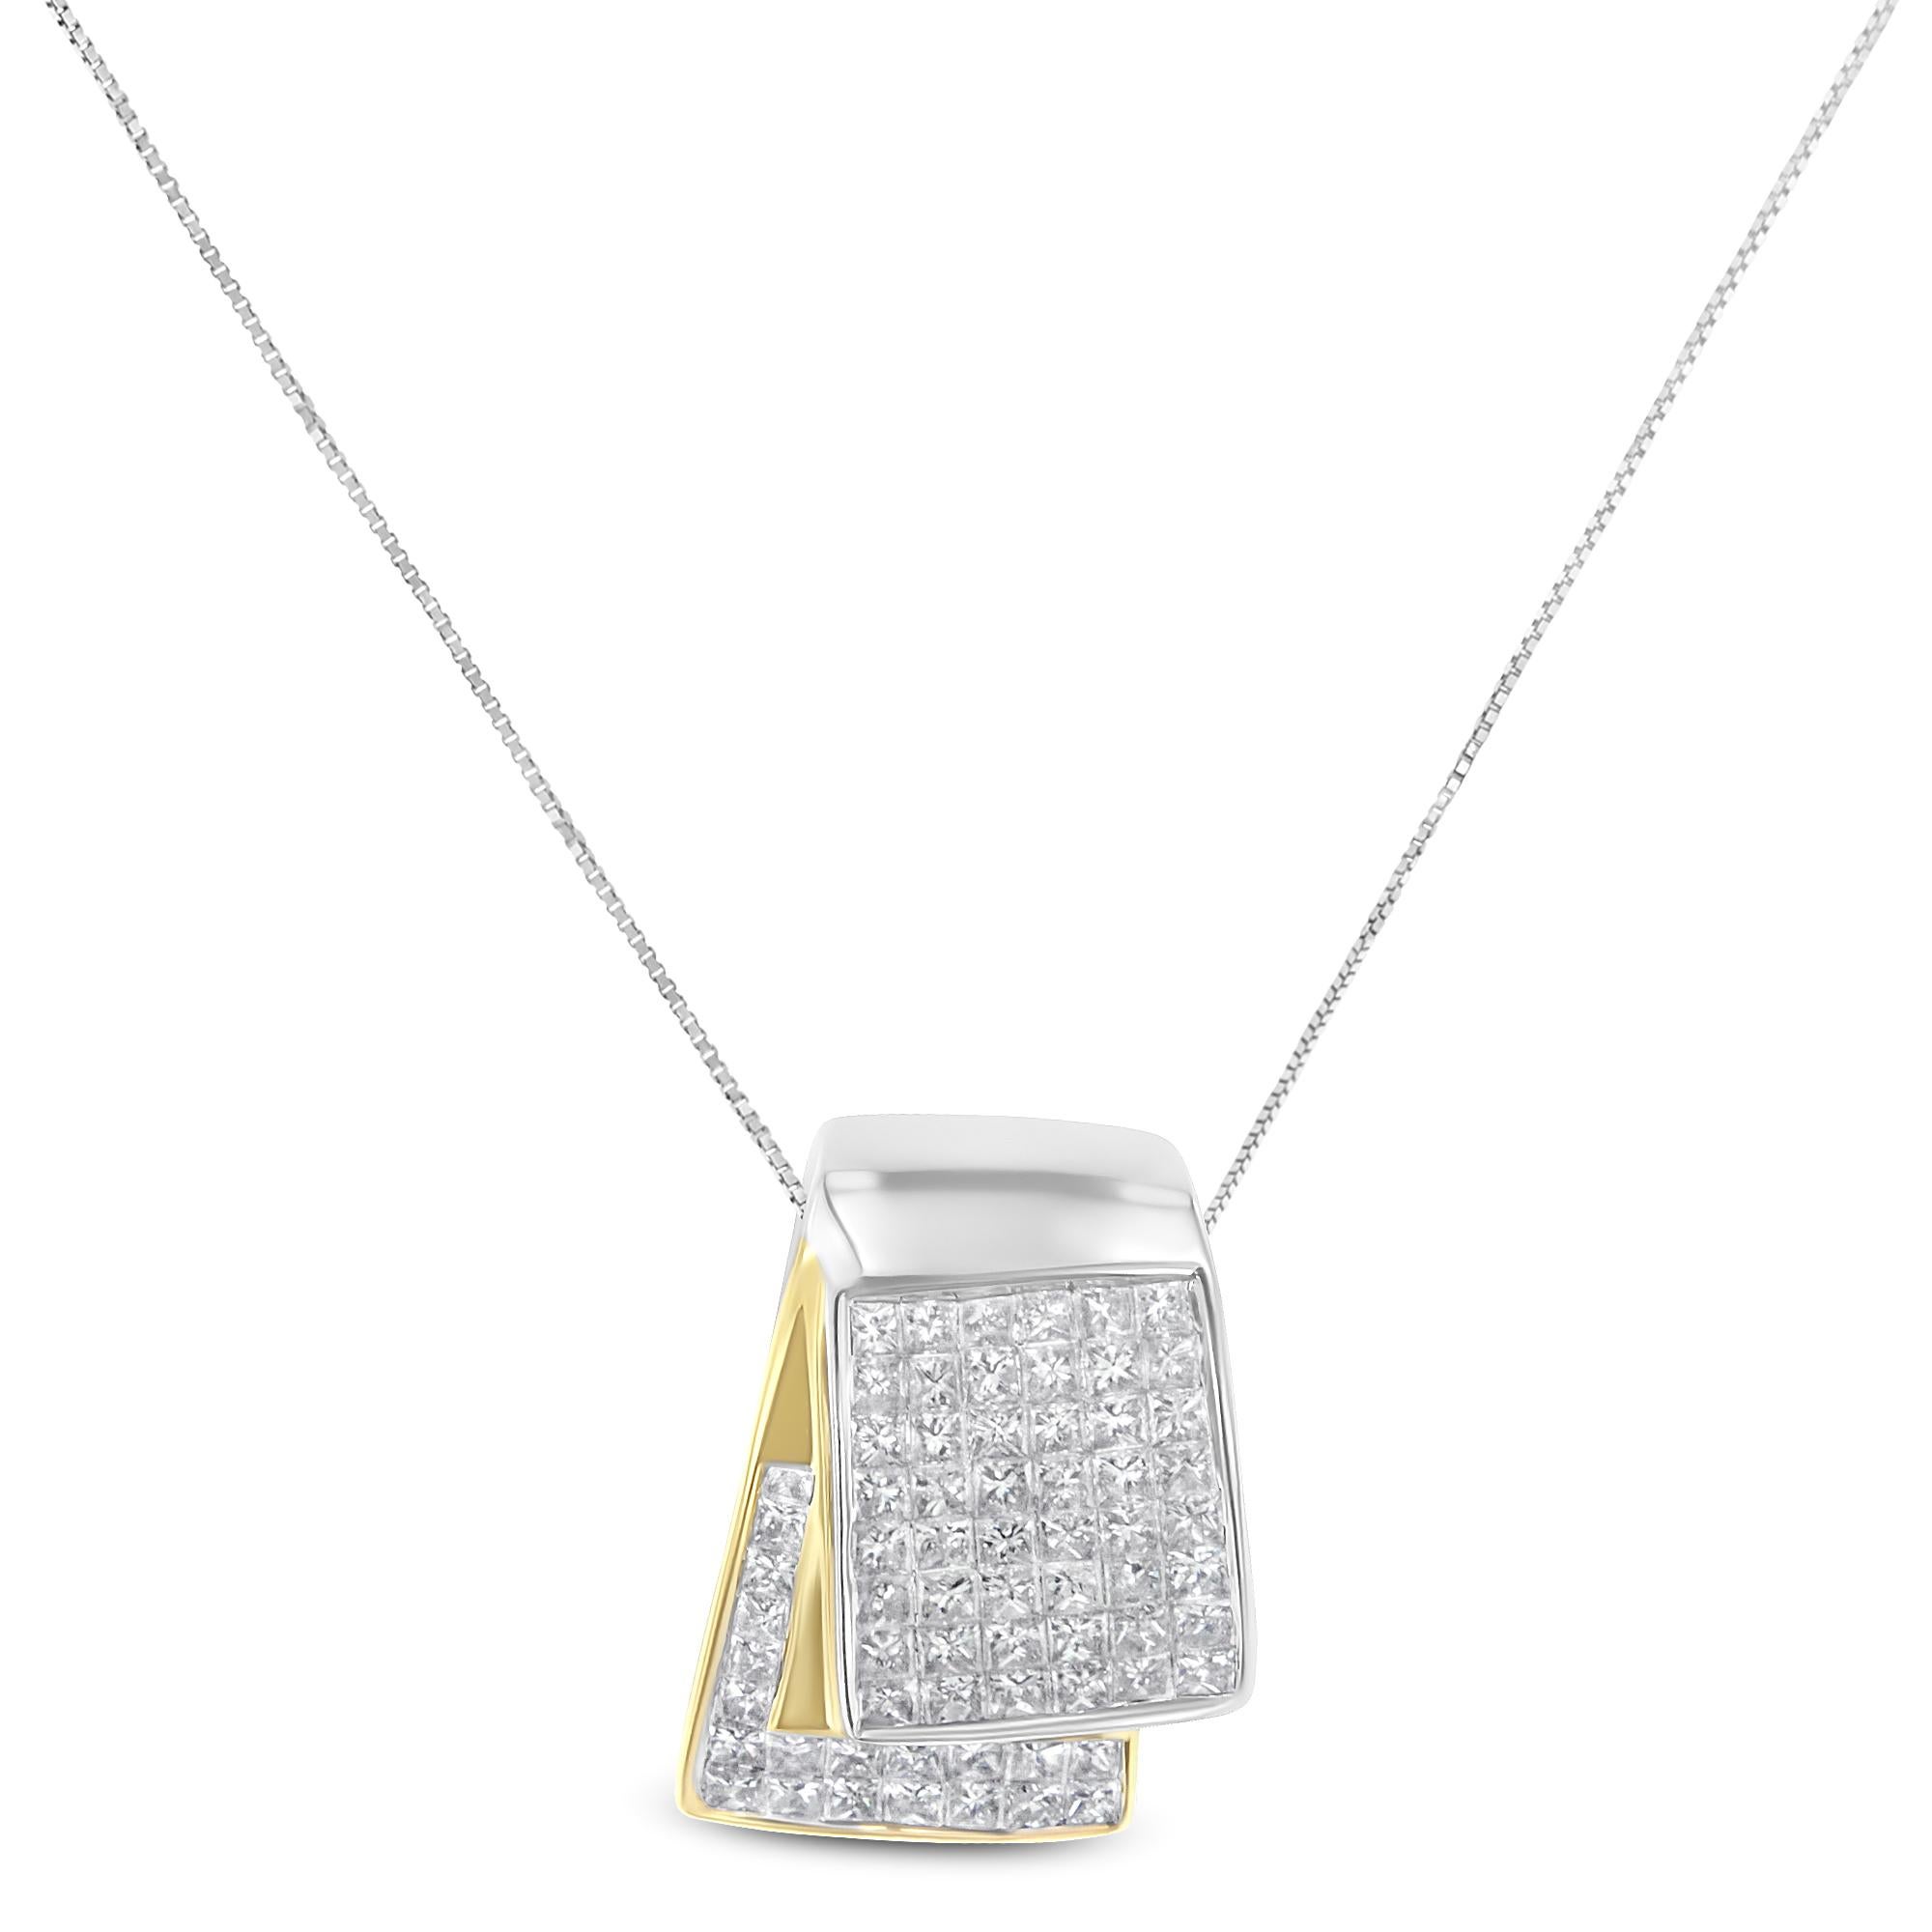 Hanging from a delicate box chain necklace is a 14k two toned gold pendant. A classic feminine piece to show off, this necklace will complement all sorts of outfits. With a unique folded design, the pendant is inlaid with 2ct princess cut diamonds